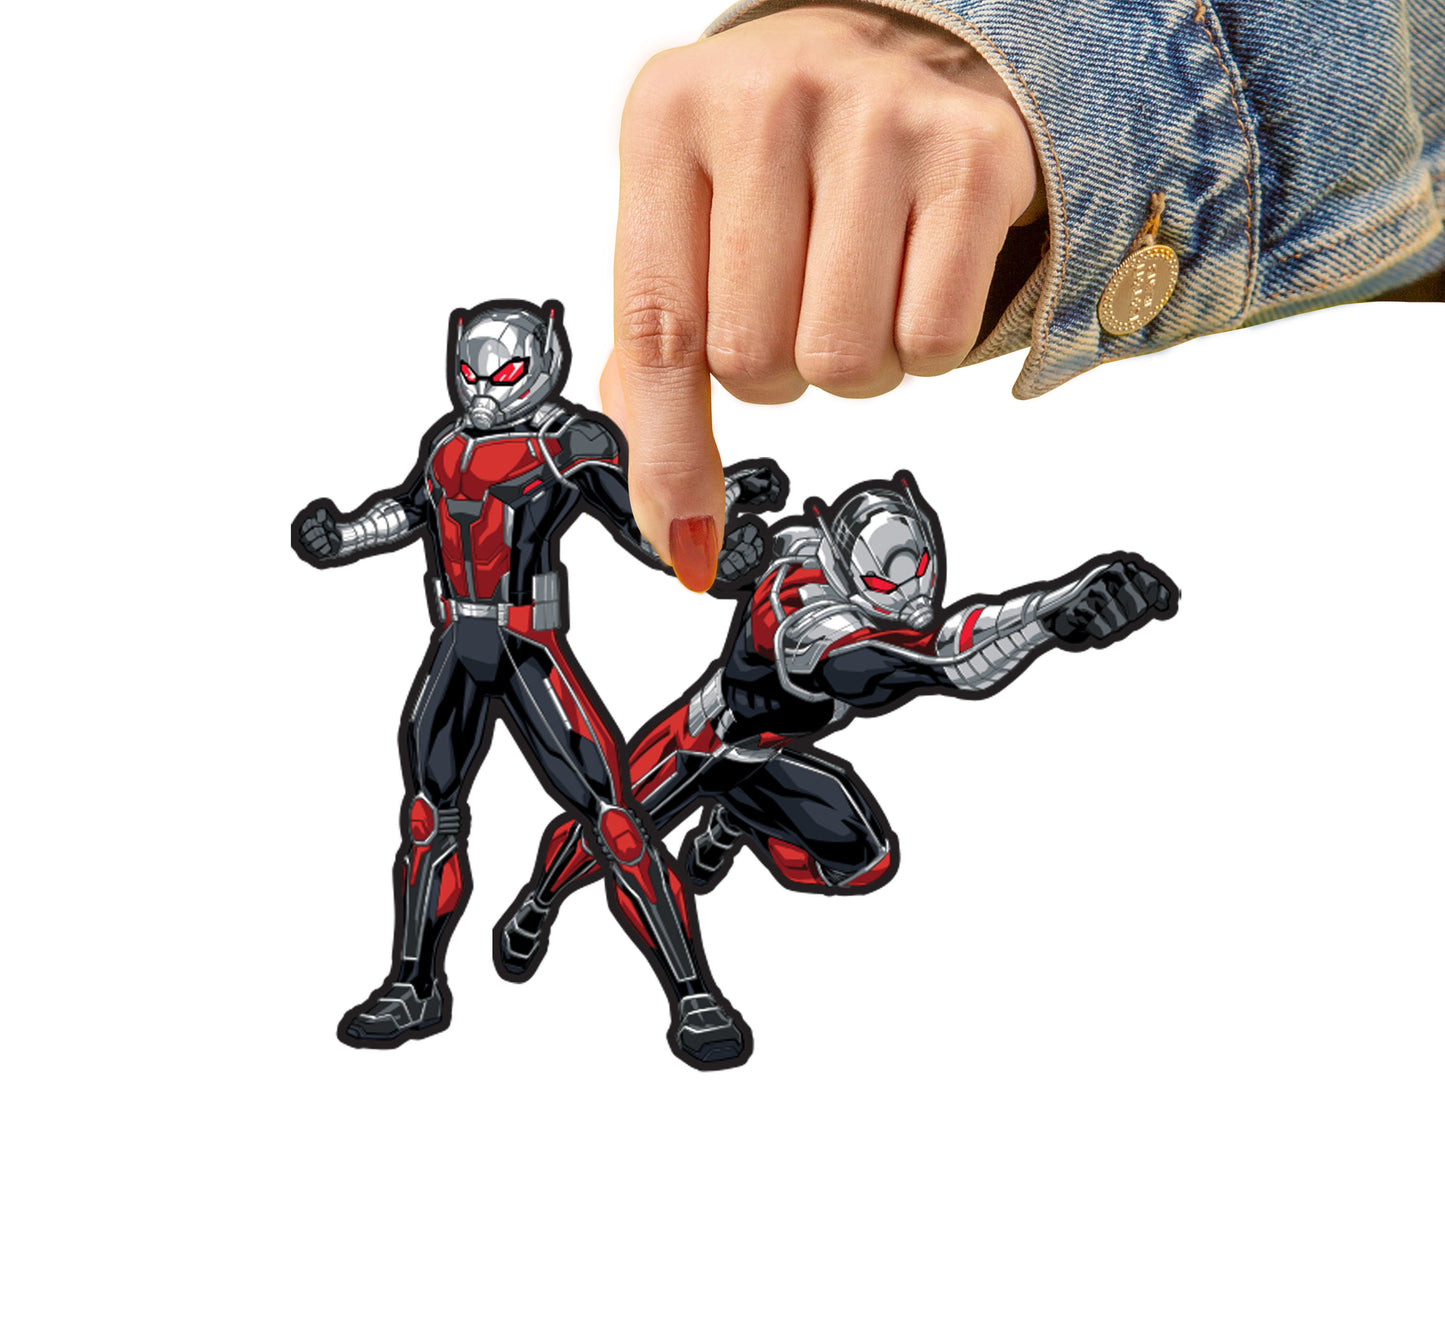 Sheet of 5 -Avengers: ANT MAN Minis        - Officially Licensed Marvel Removable    Adhesive Decal